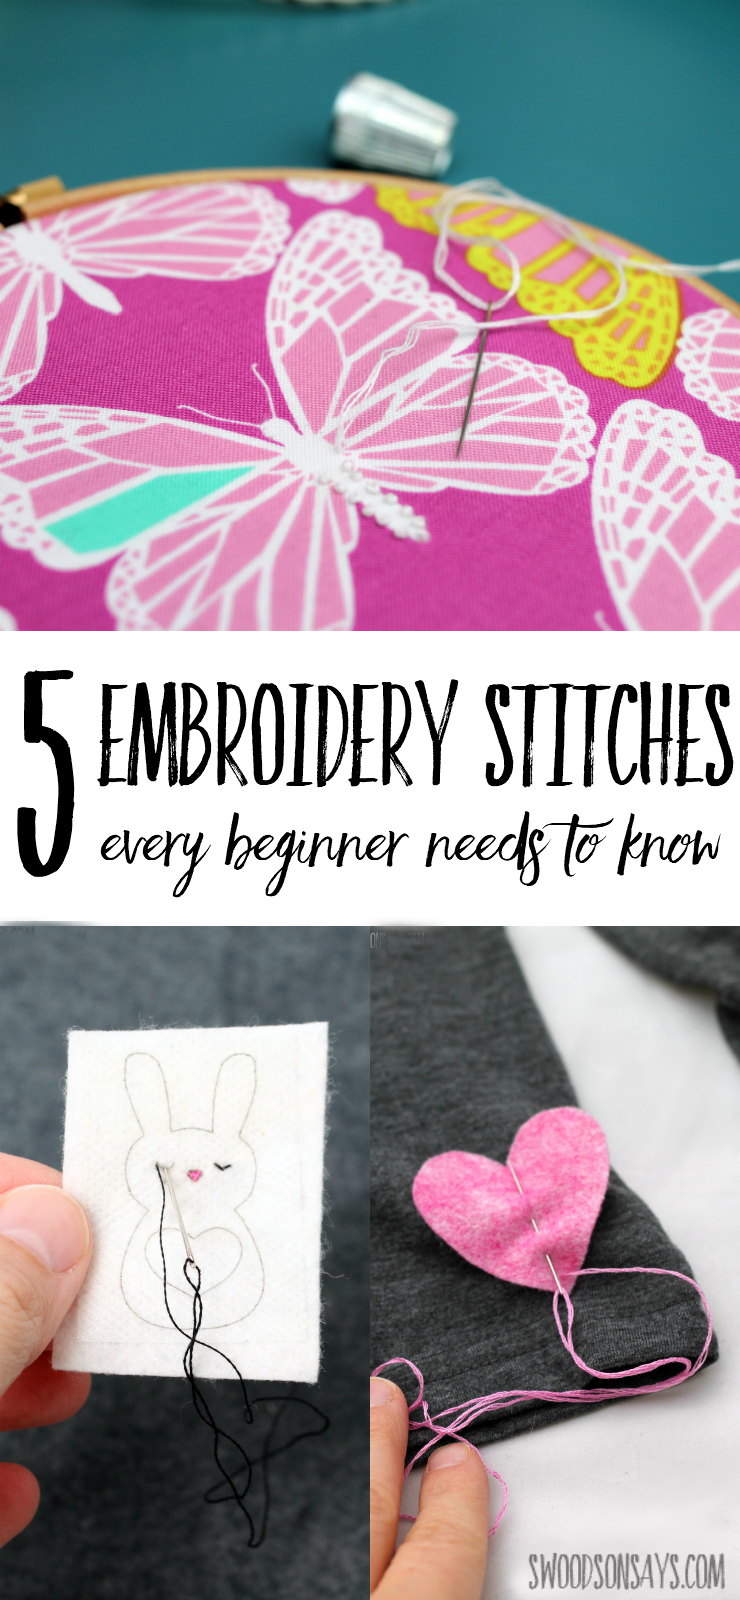 Check out the 5 basic embroidery stitches everyone should know. Perfect embroidery stitches for beginners, you can stitch all sorts of patterns with these embroidery tutorials! #embroidery #handsewing